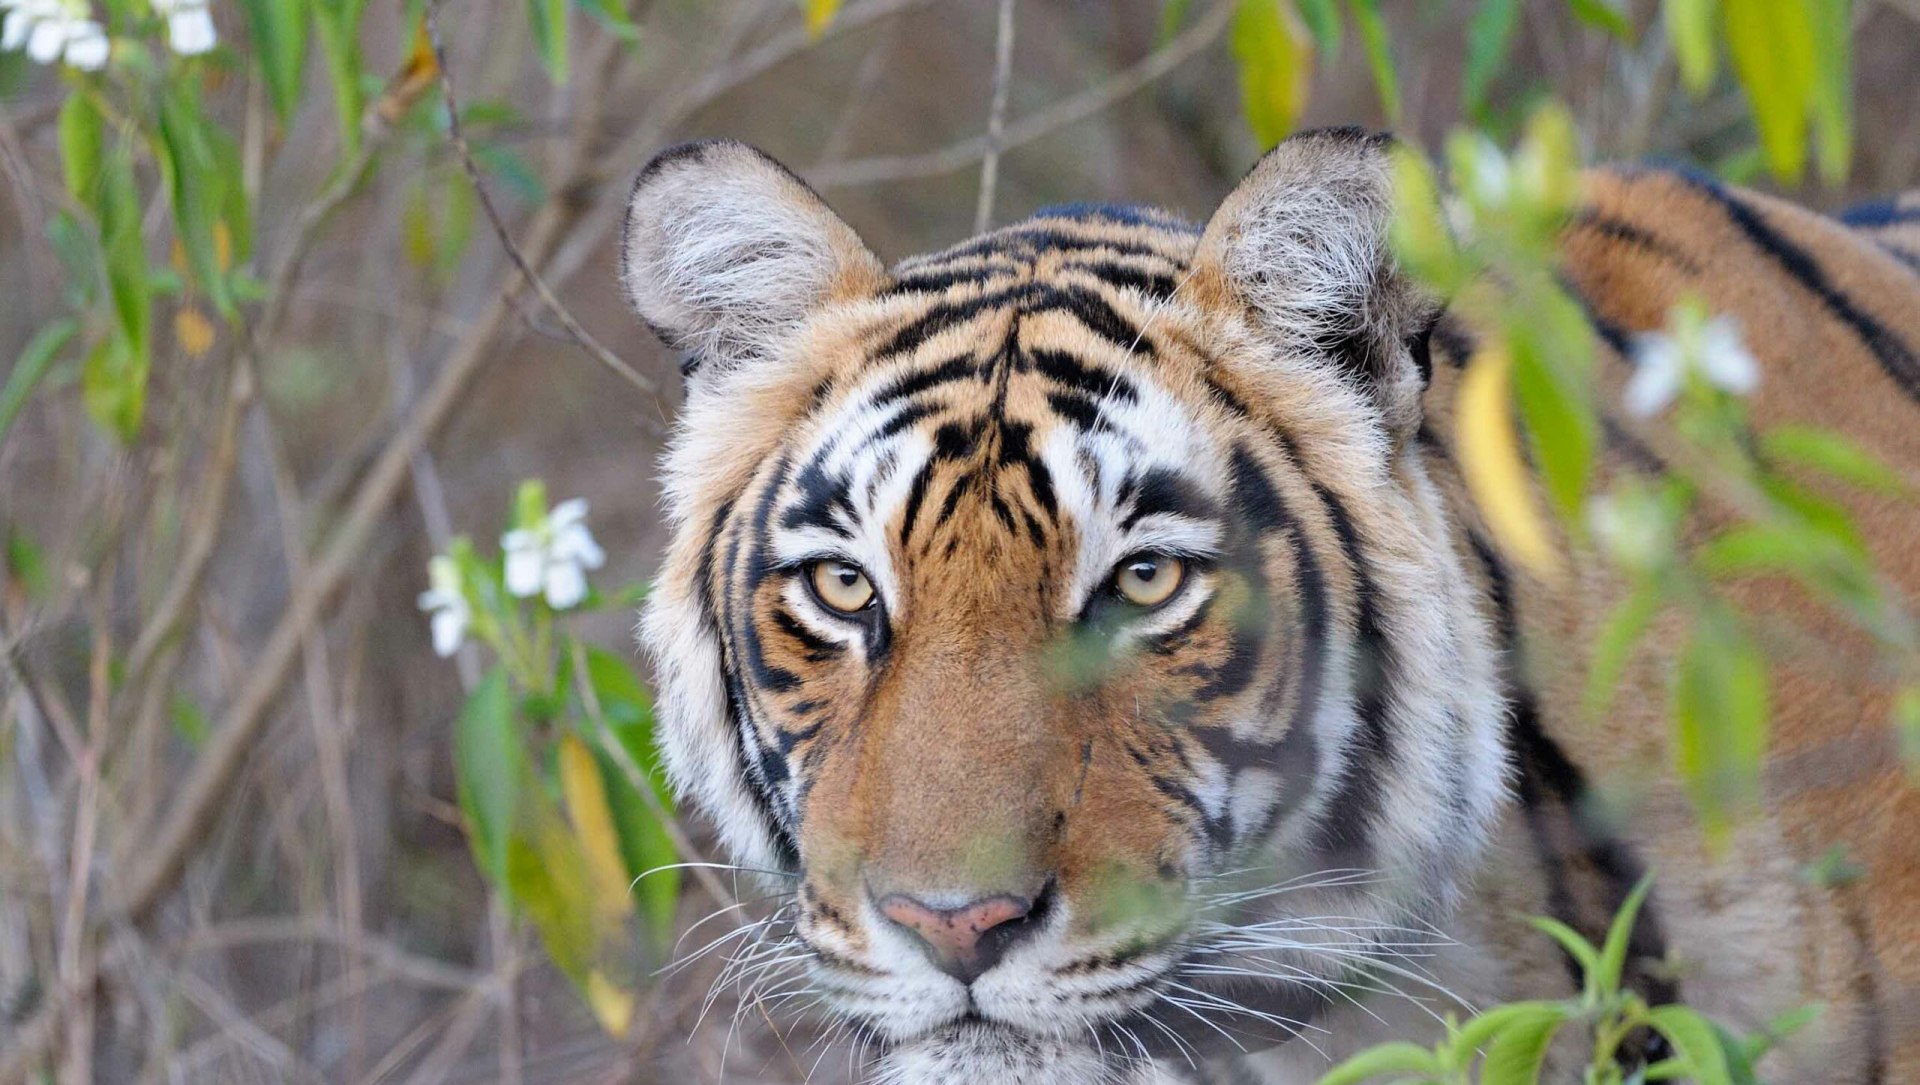 Tiger Recorded at Buxa After 23 Years